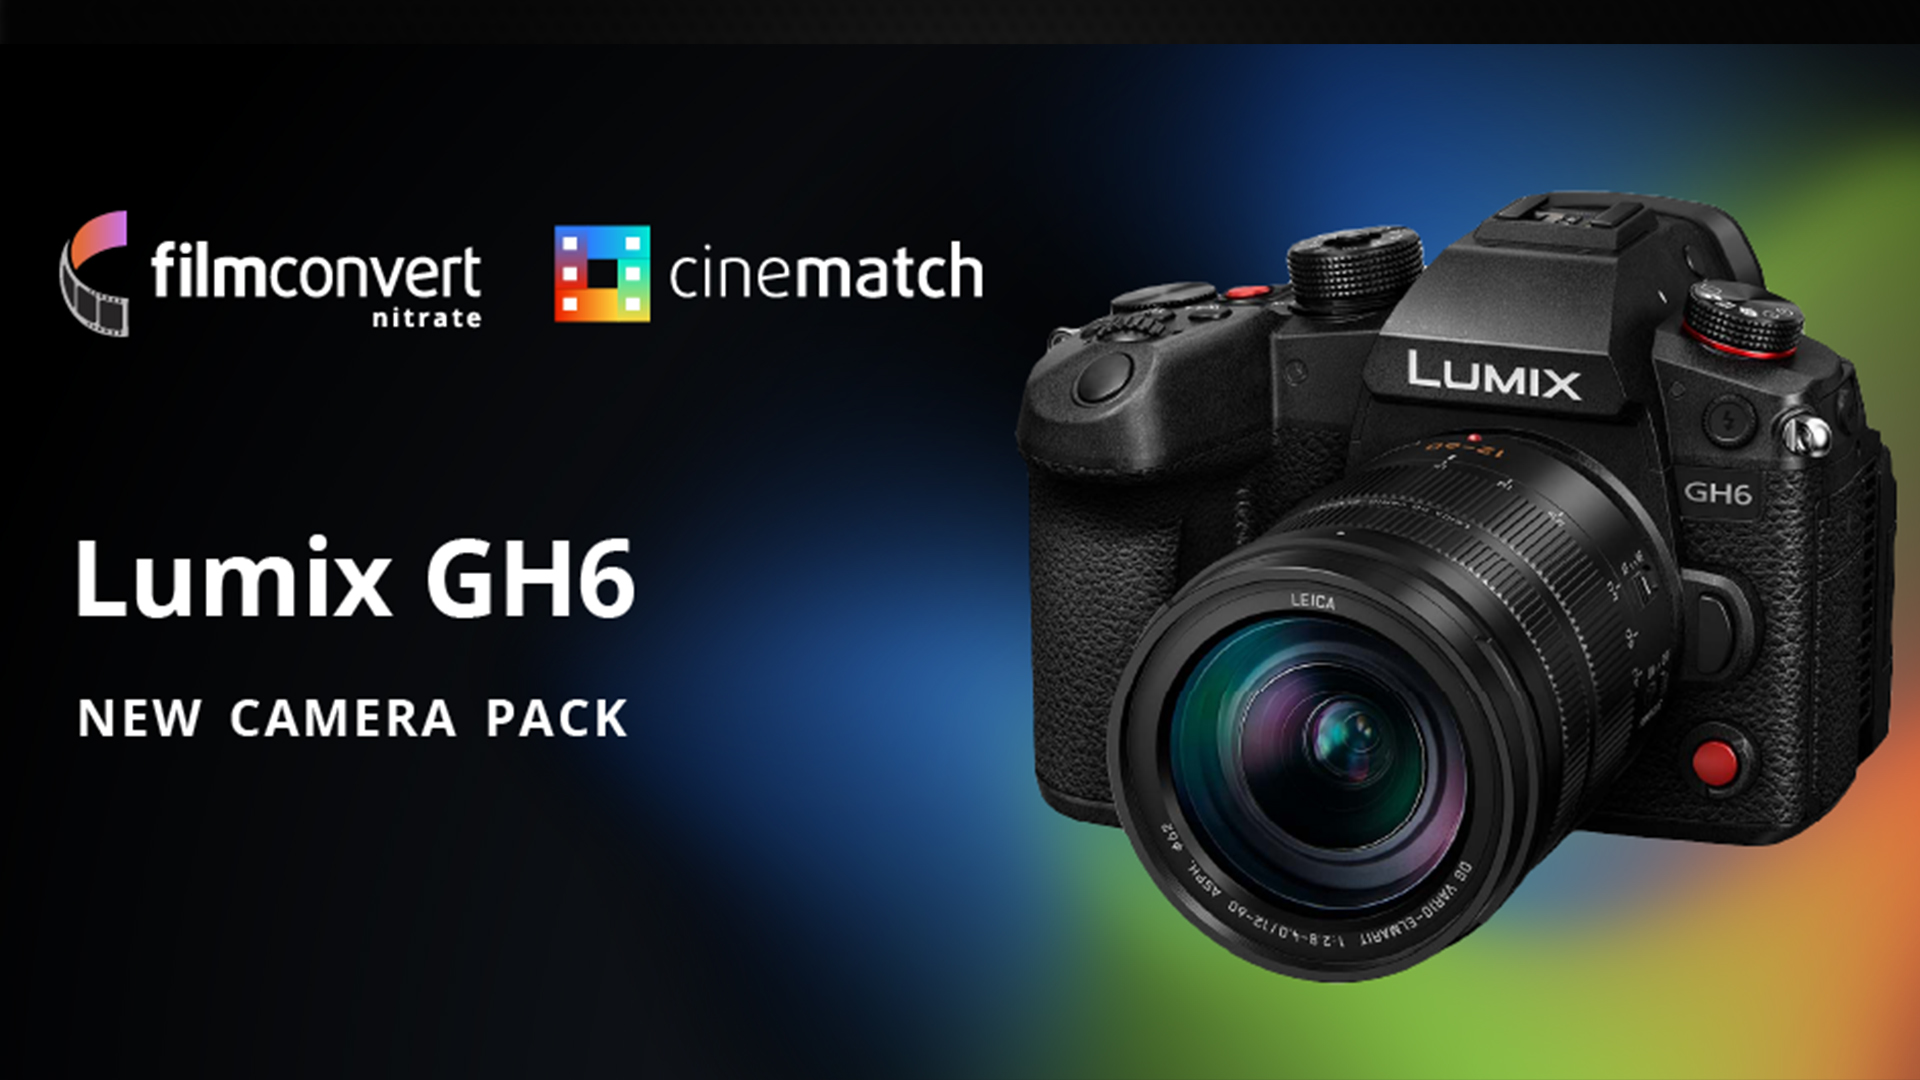 Panasonic GH6 support comes to FilmConvert Nitrate and CineMatch - Newsshooter